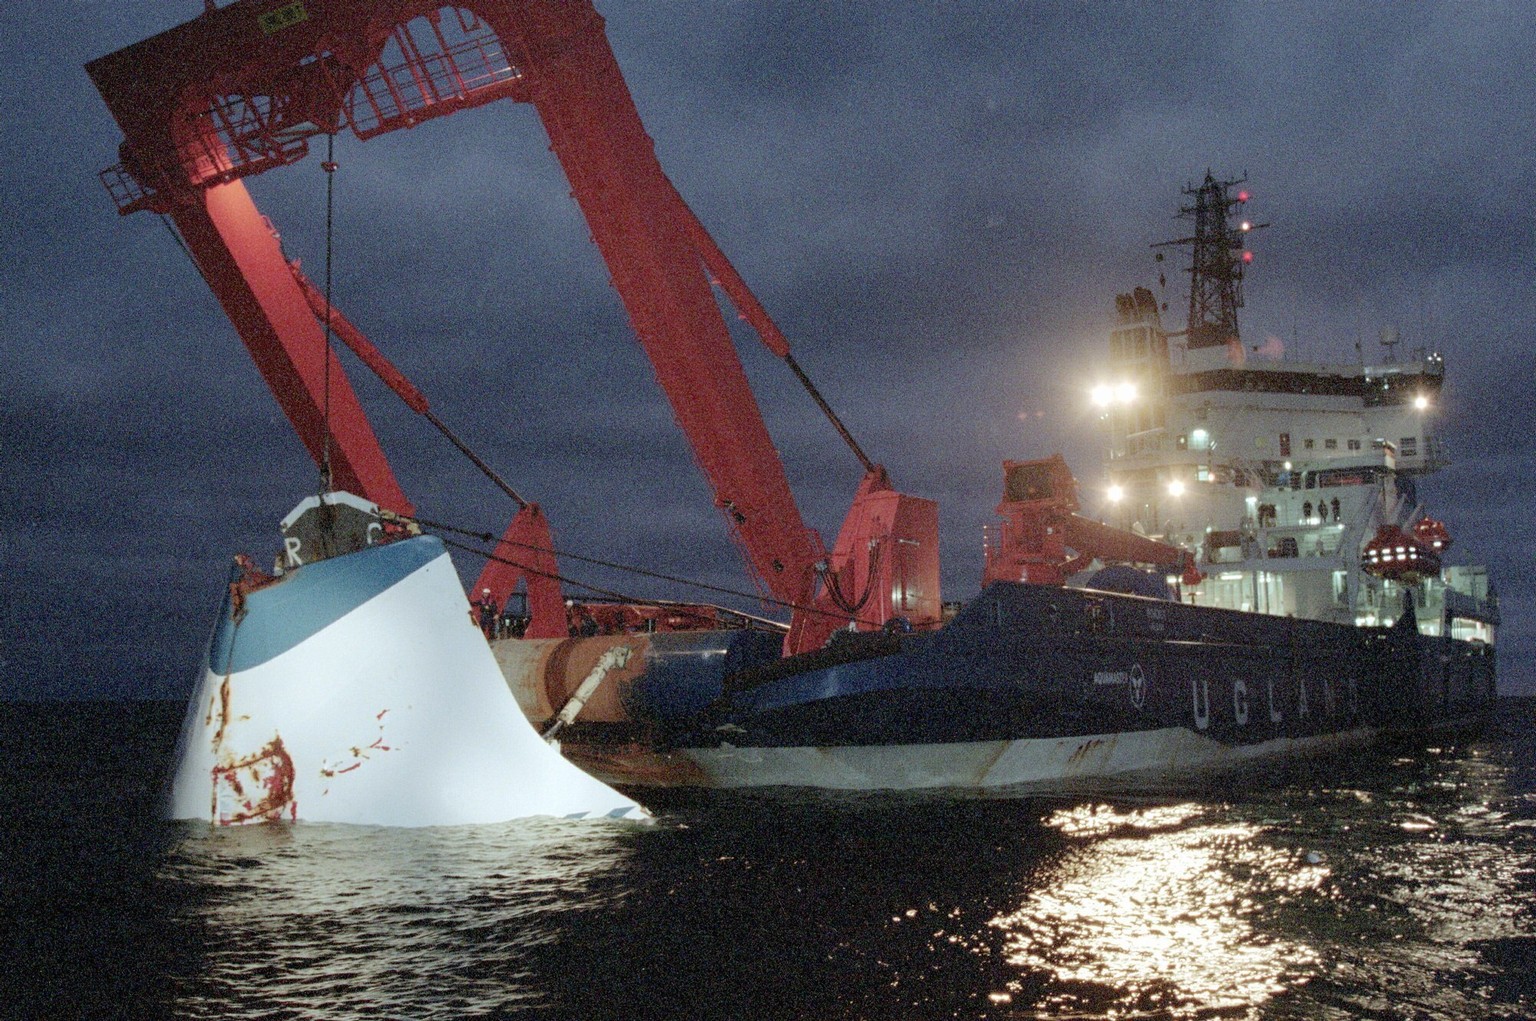 FILE - In this Nov. 19, 1994 file photo, the bow door of the sunken passenger ferry M/S Estonia is lifted up from the bottom of the sea, off Uto Island, in the Baltic Sea. The governments of Sweden, F ...